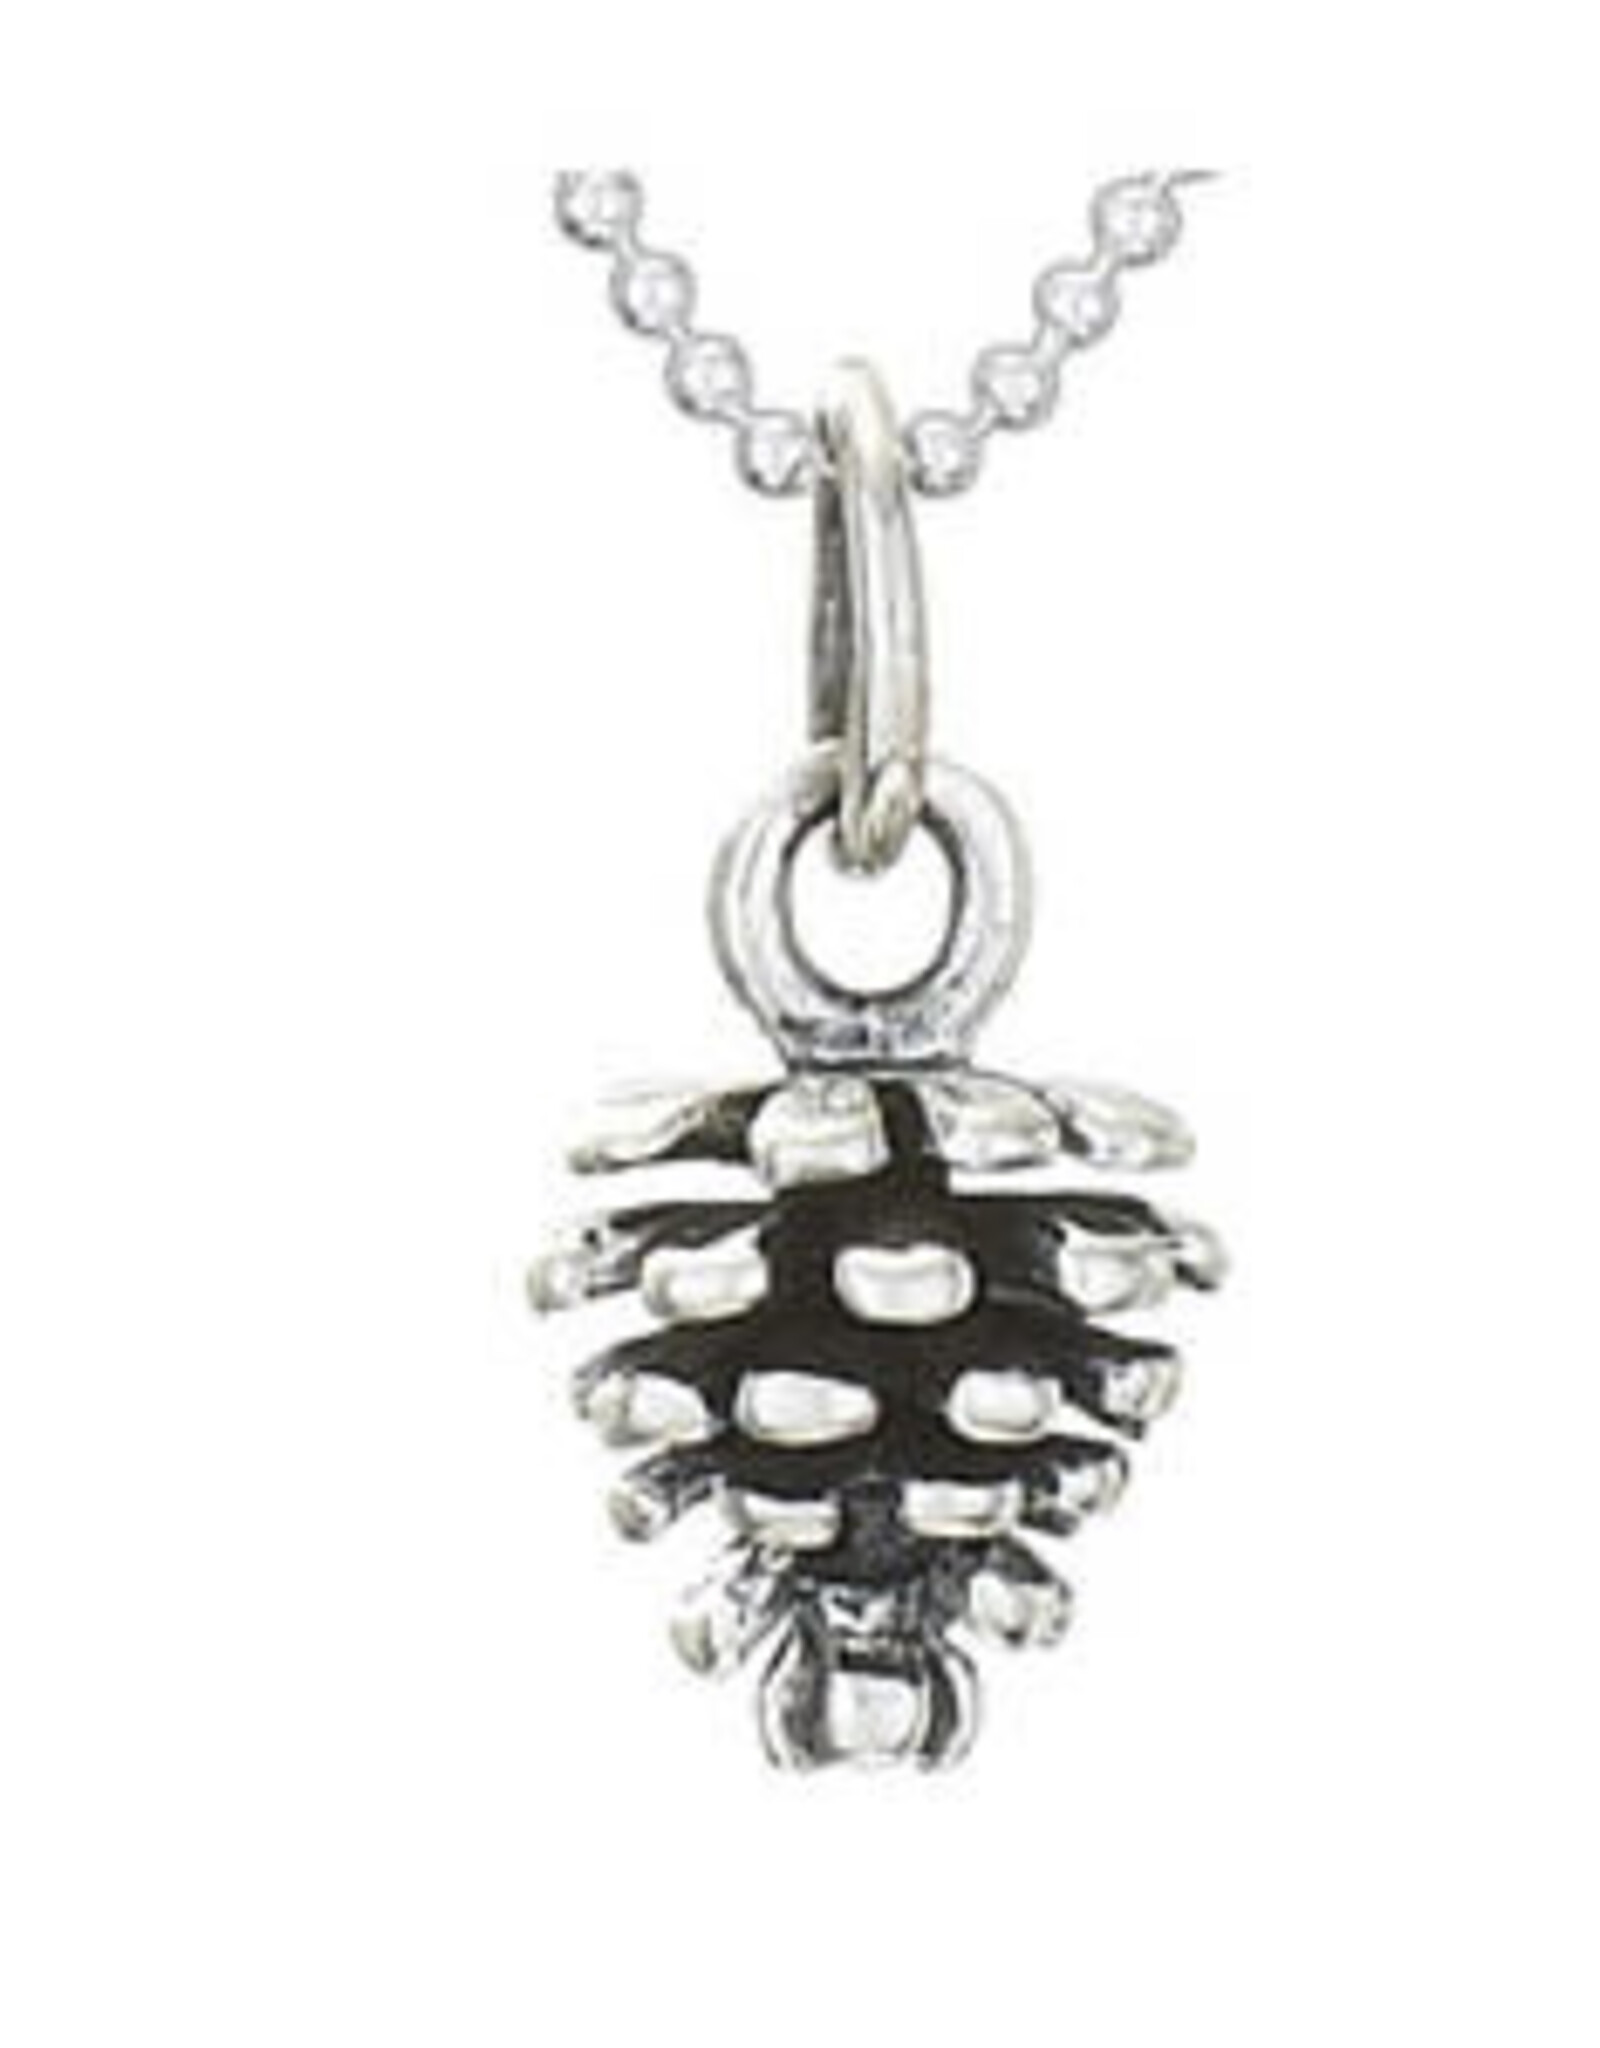 Tiger Mountain PINECONE NECKLACE - sterling silver